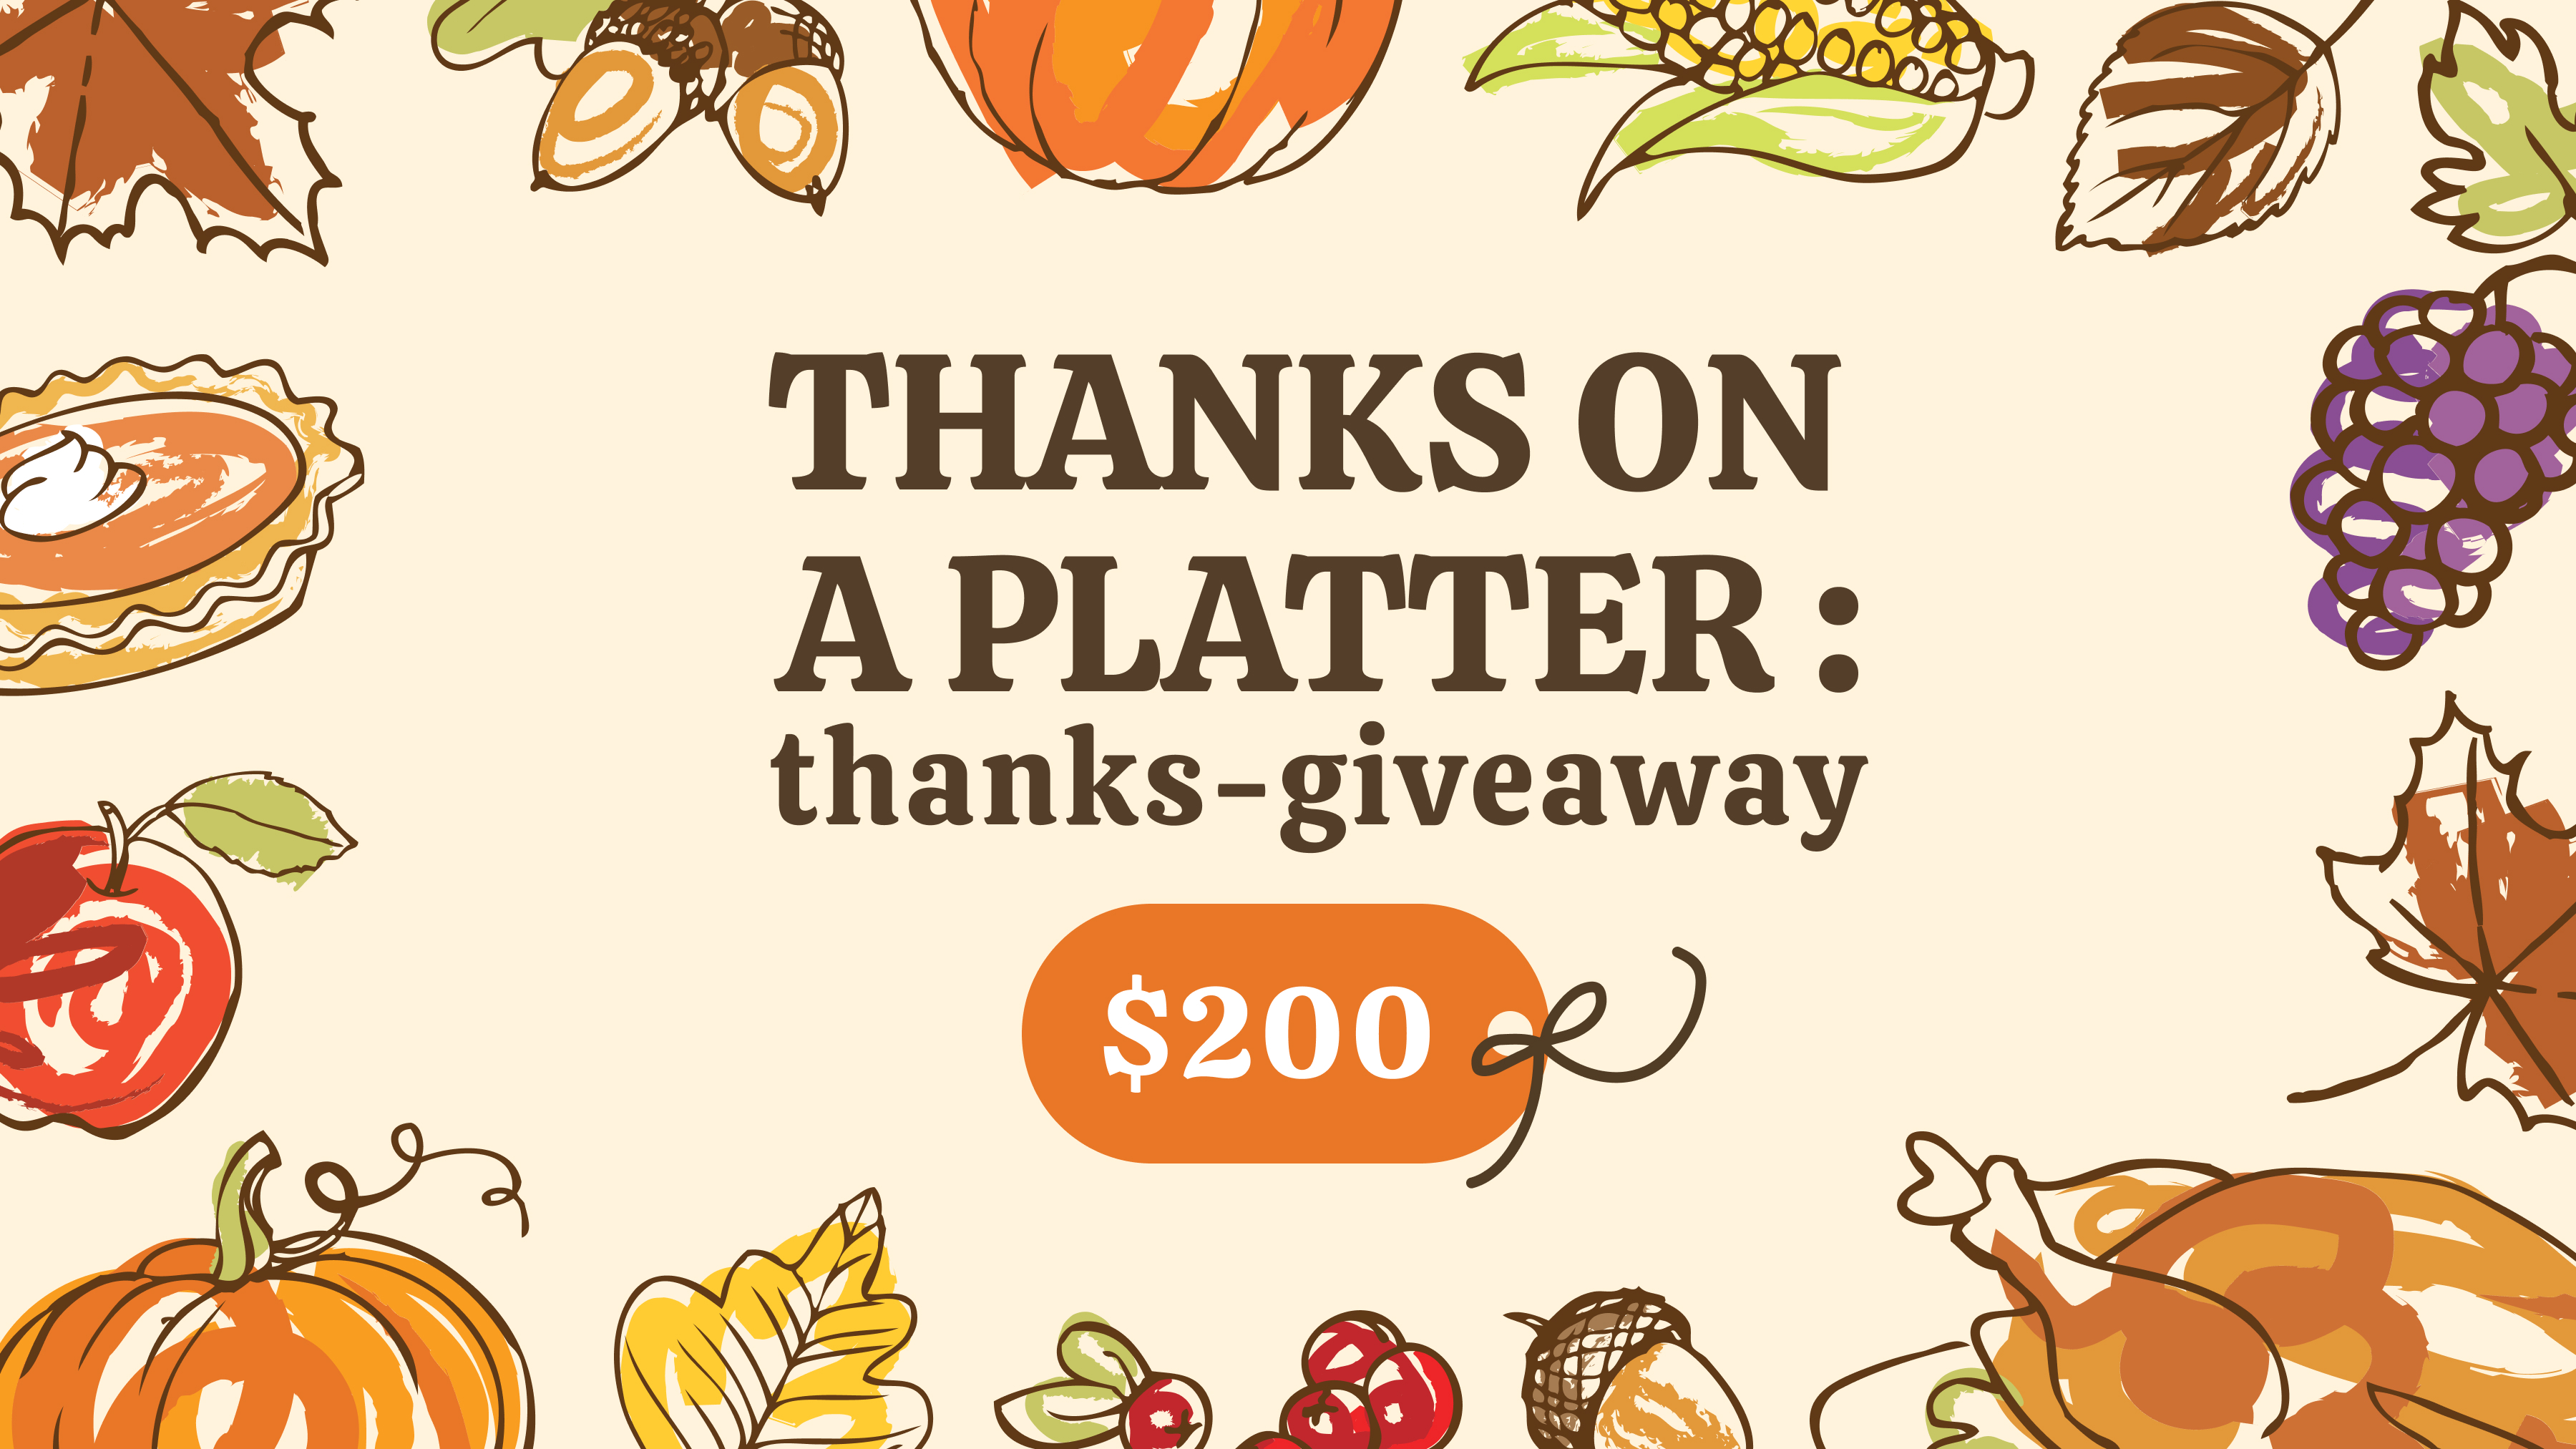 Thanks-giveaway $200 thanksgiving dinner photo contest